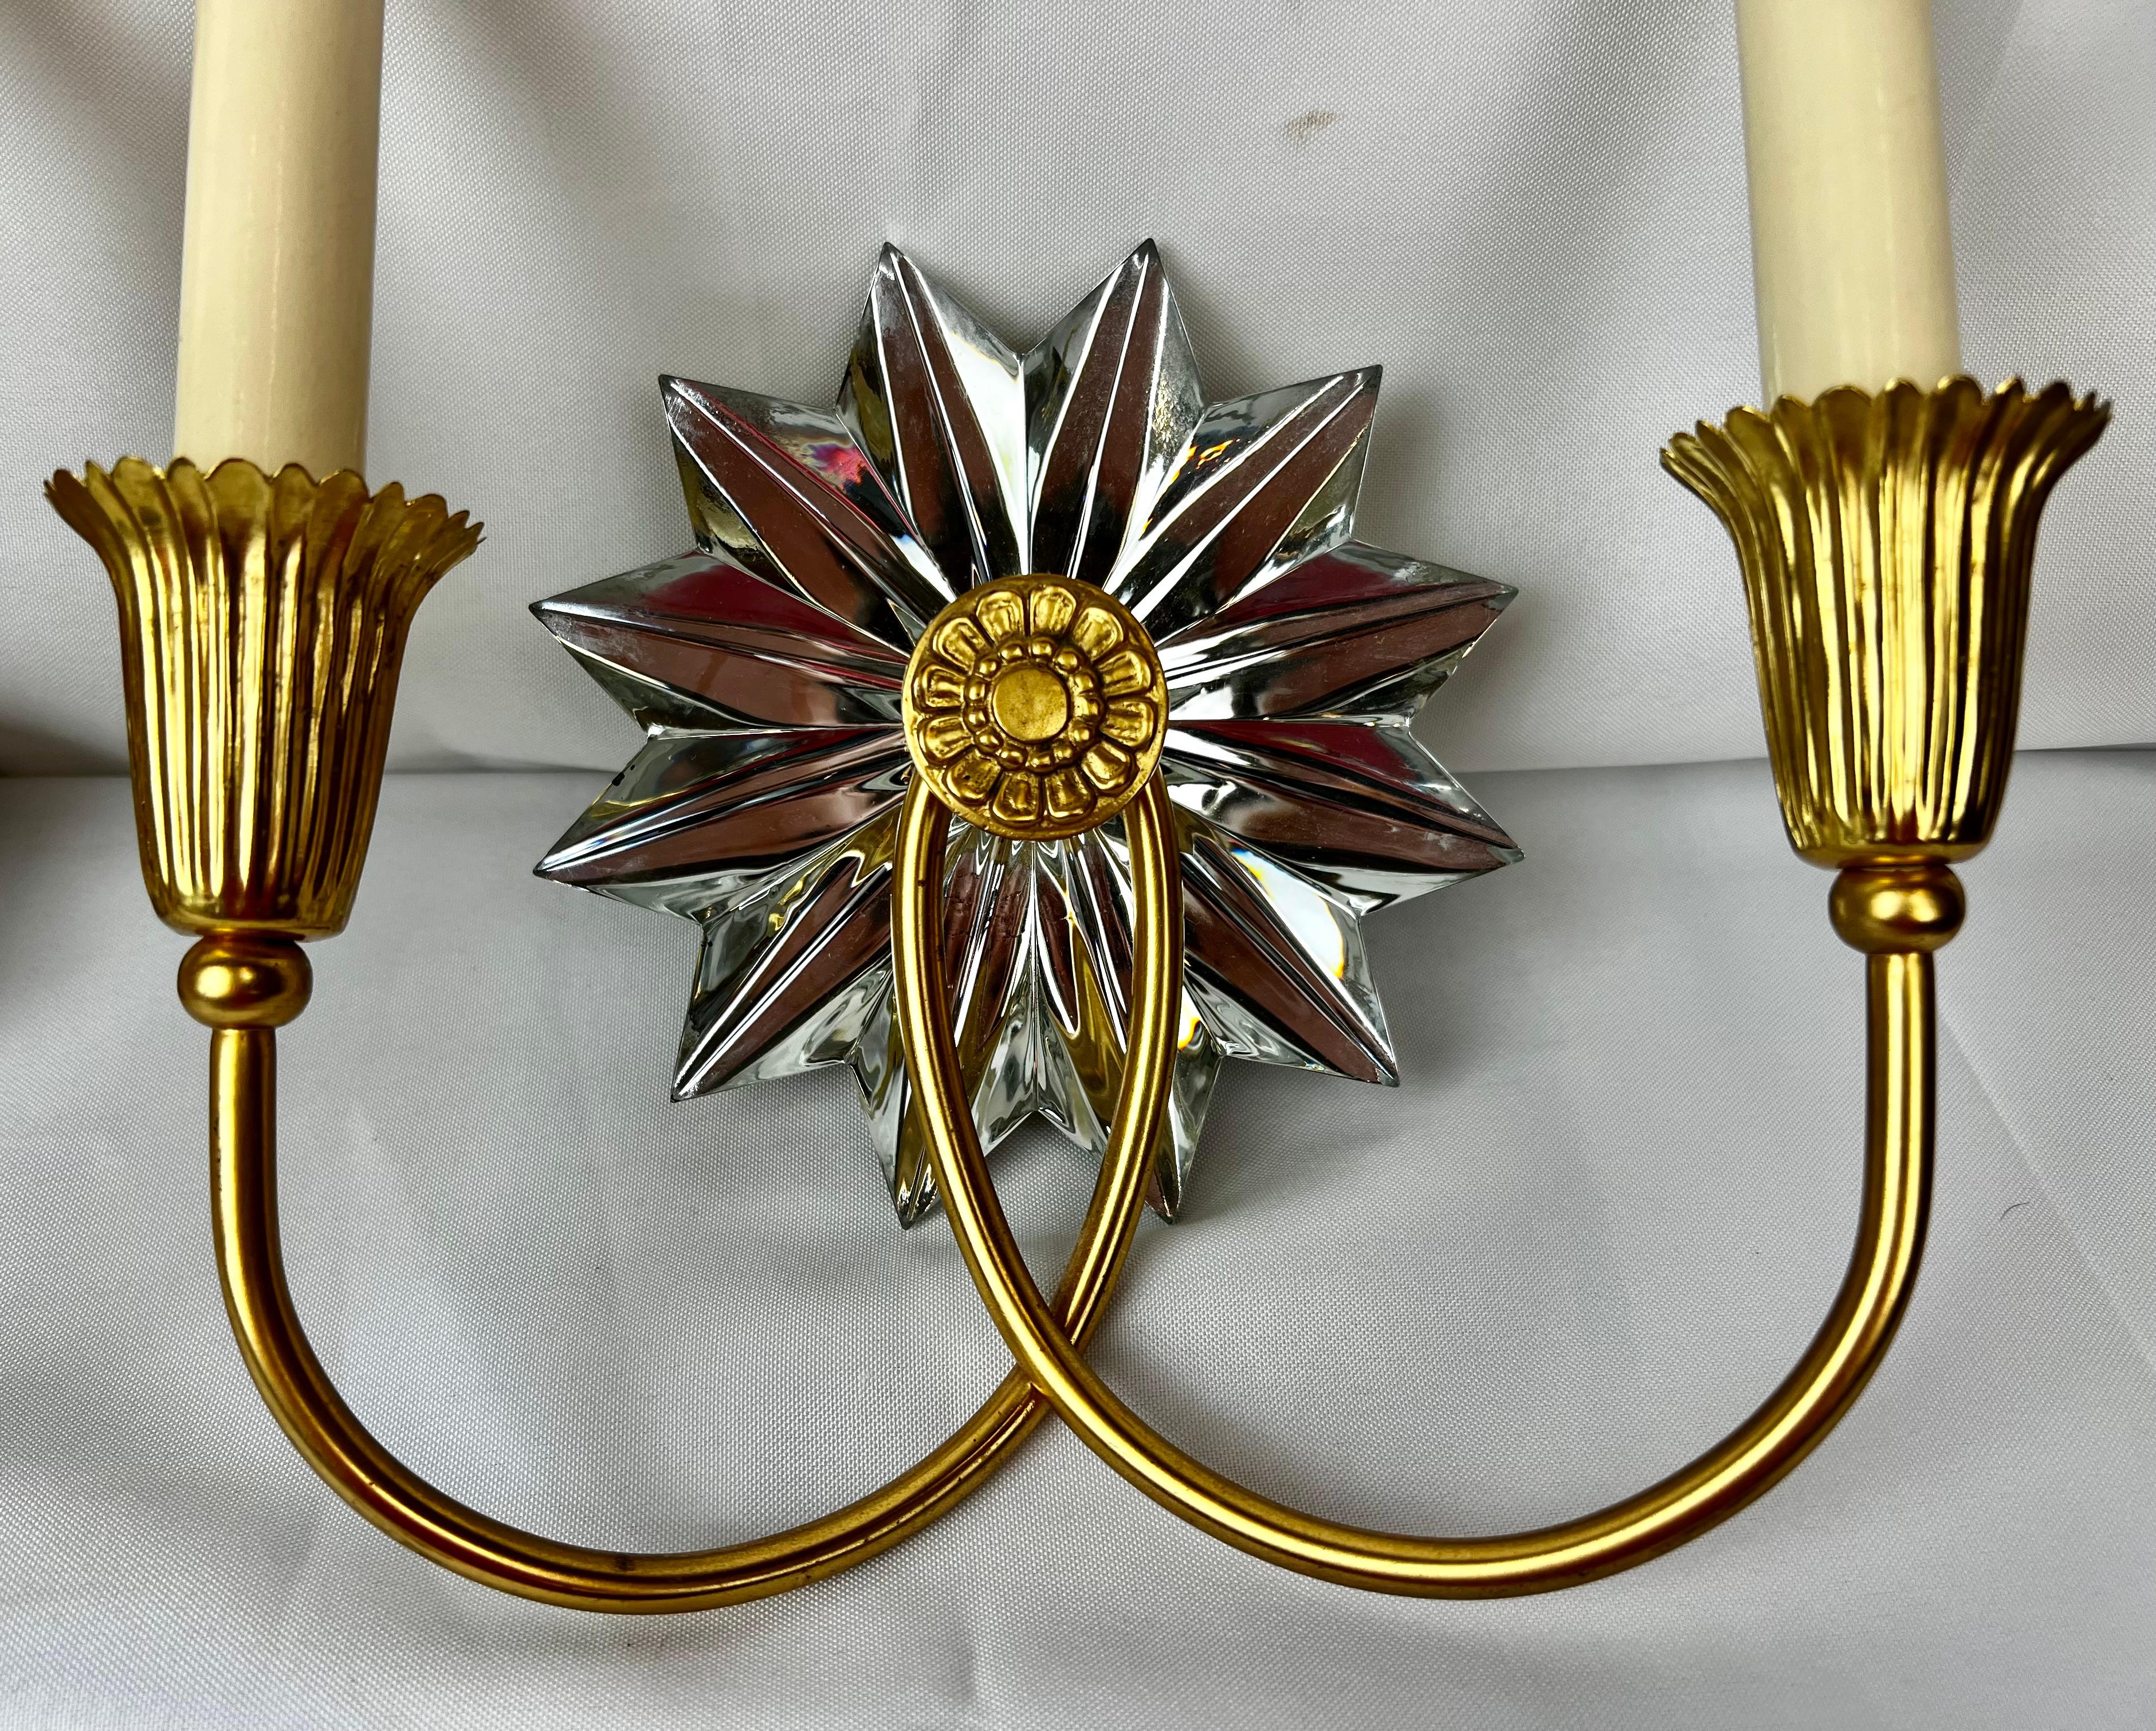 Pair of gilt two light sconces each with a mirrored 12 point starburst. The gilt finish and mirrored appointments give them a stand alone appeal that can mix with modern or traditional.
They are in nearly new condition.
H-10.25